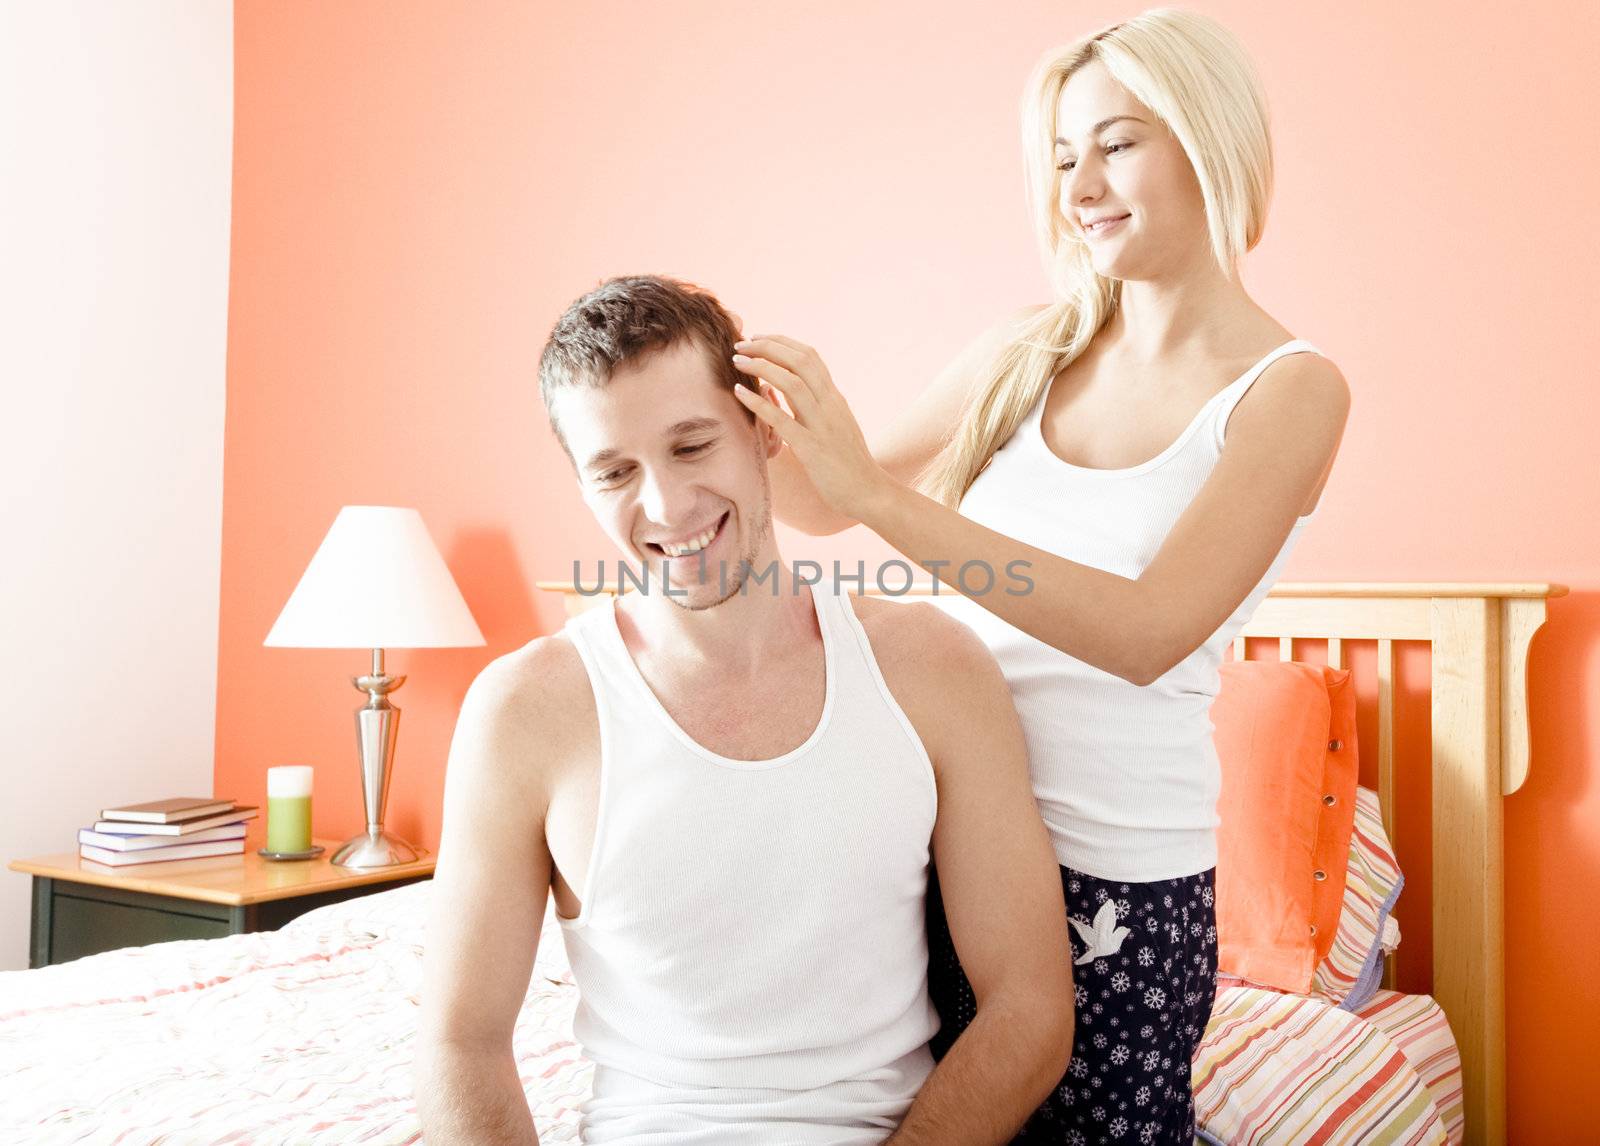 Woman ruffles man's hair as they relax in their bedroom. Horizontal format.